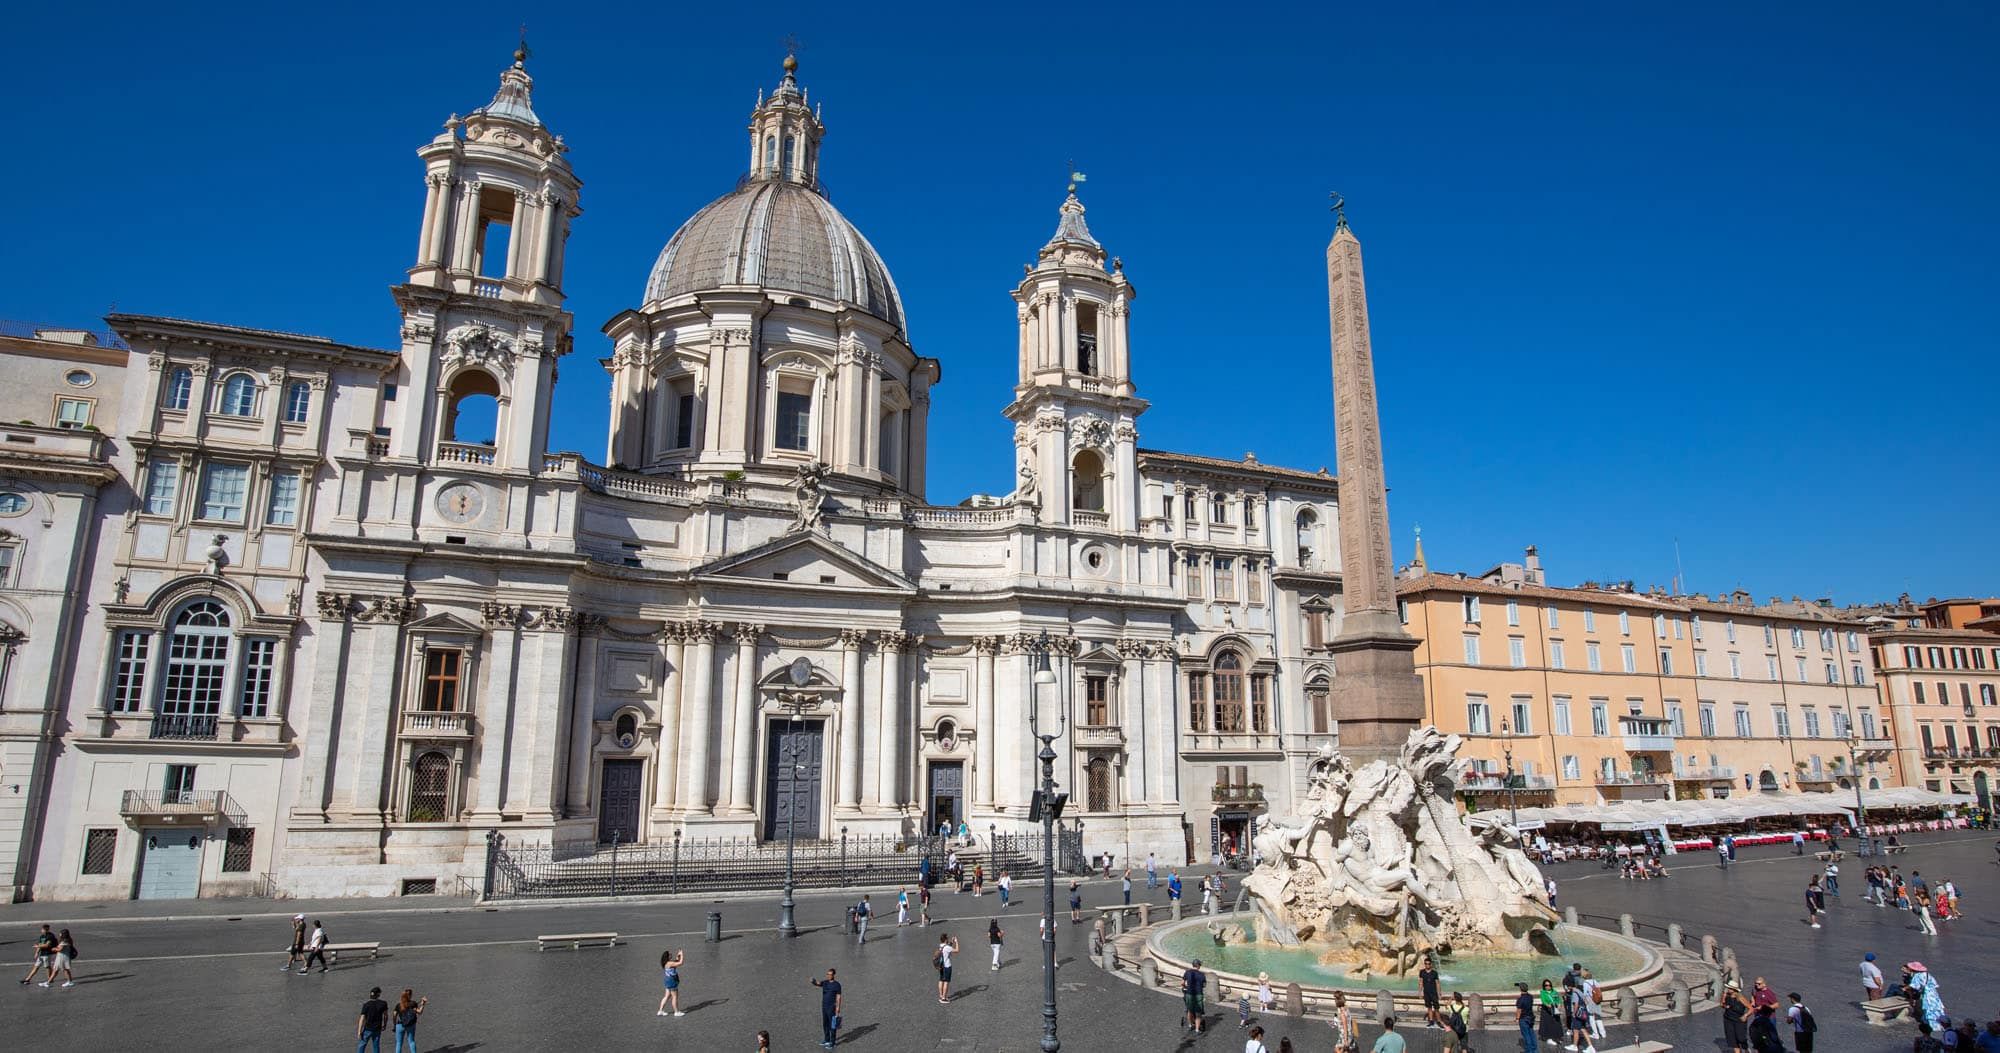 Featured image for “Where to Stay in Rome – Best Hotels & Neighborhoods for Your Budget”